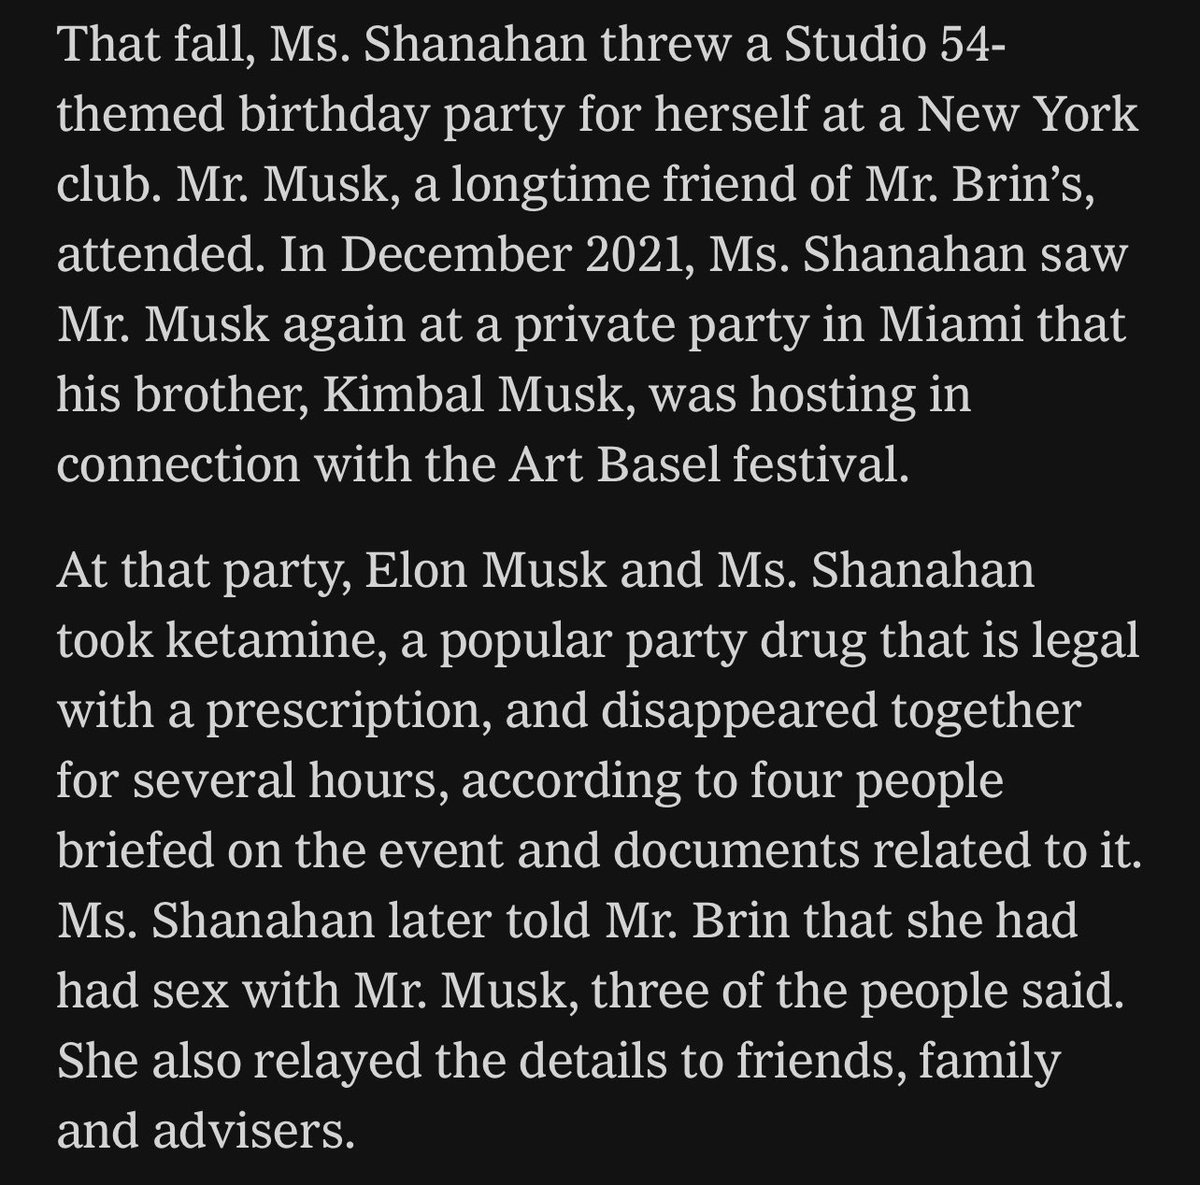 Confirmed that Elon got high and slept with the wife of one of his good friends